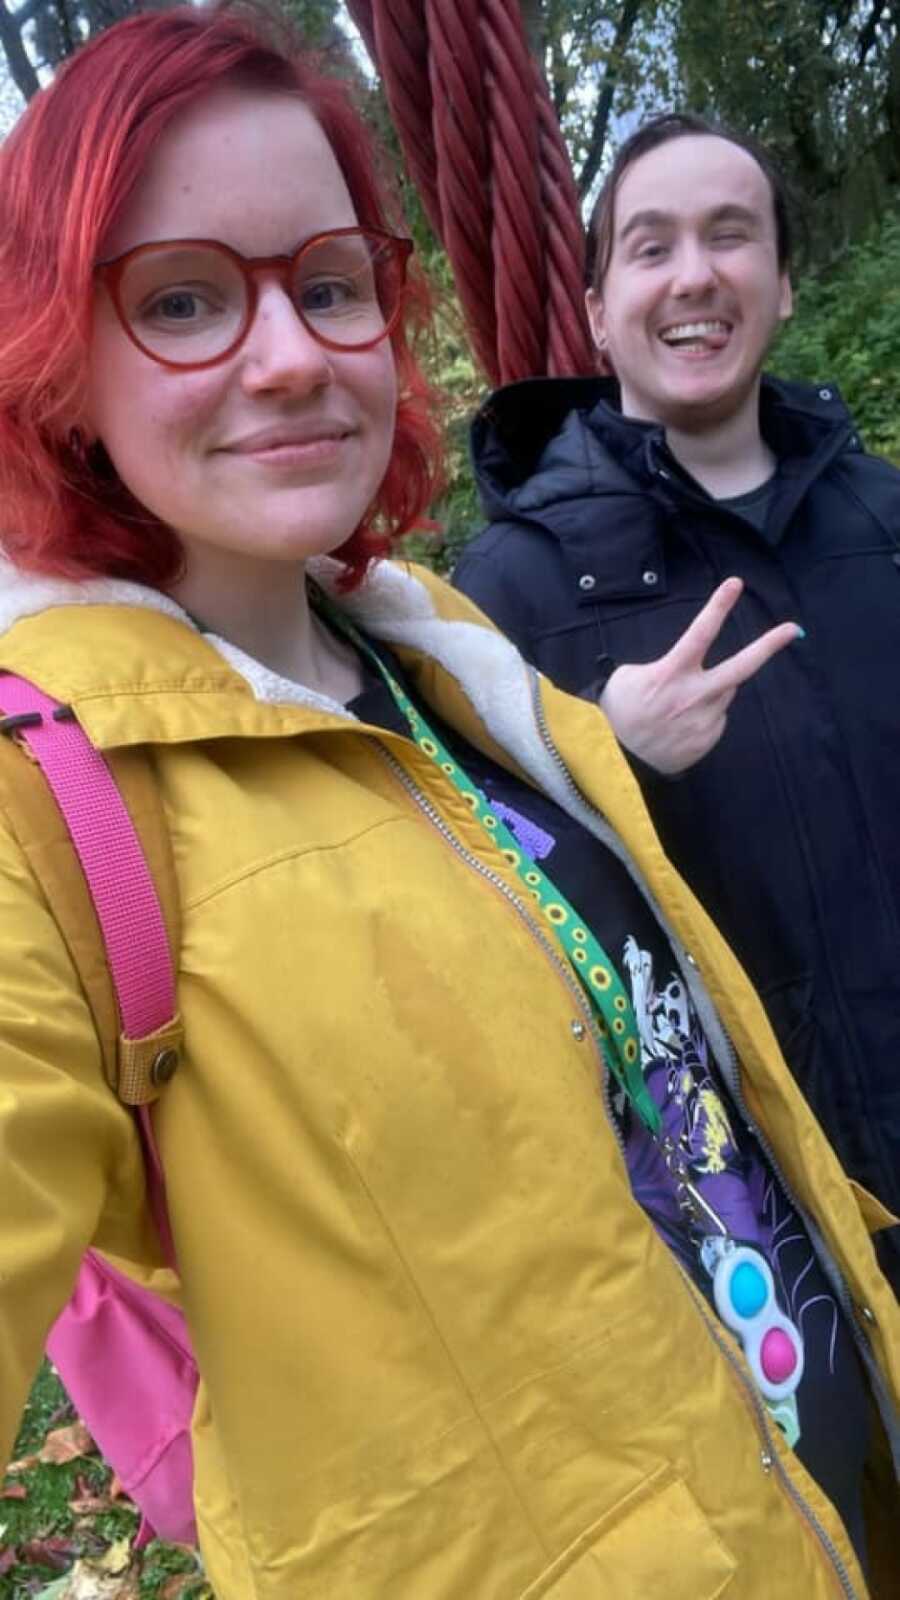 autistic woman in yellow jacket taking selfie with friend